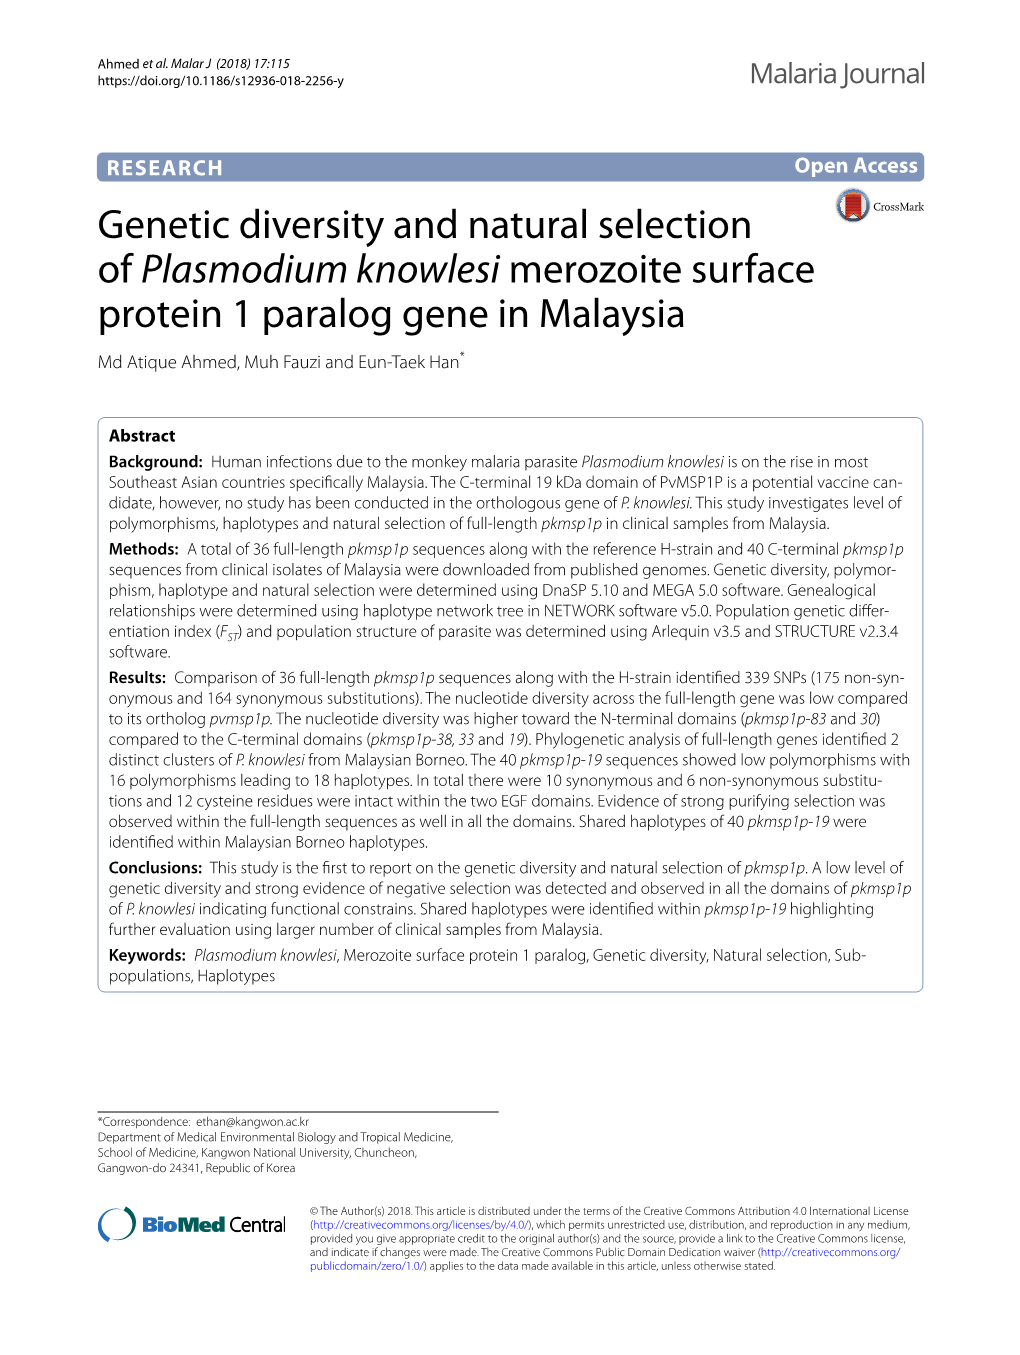 Genetic Diversity and Natural Selection of Plasmodium Knowlesi Merozoite Surface Protein 1 Paralog Gene in Malaysia Md Atique Ahmed, Muh Fauzi and Eun‑Taek Han*